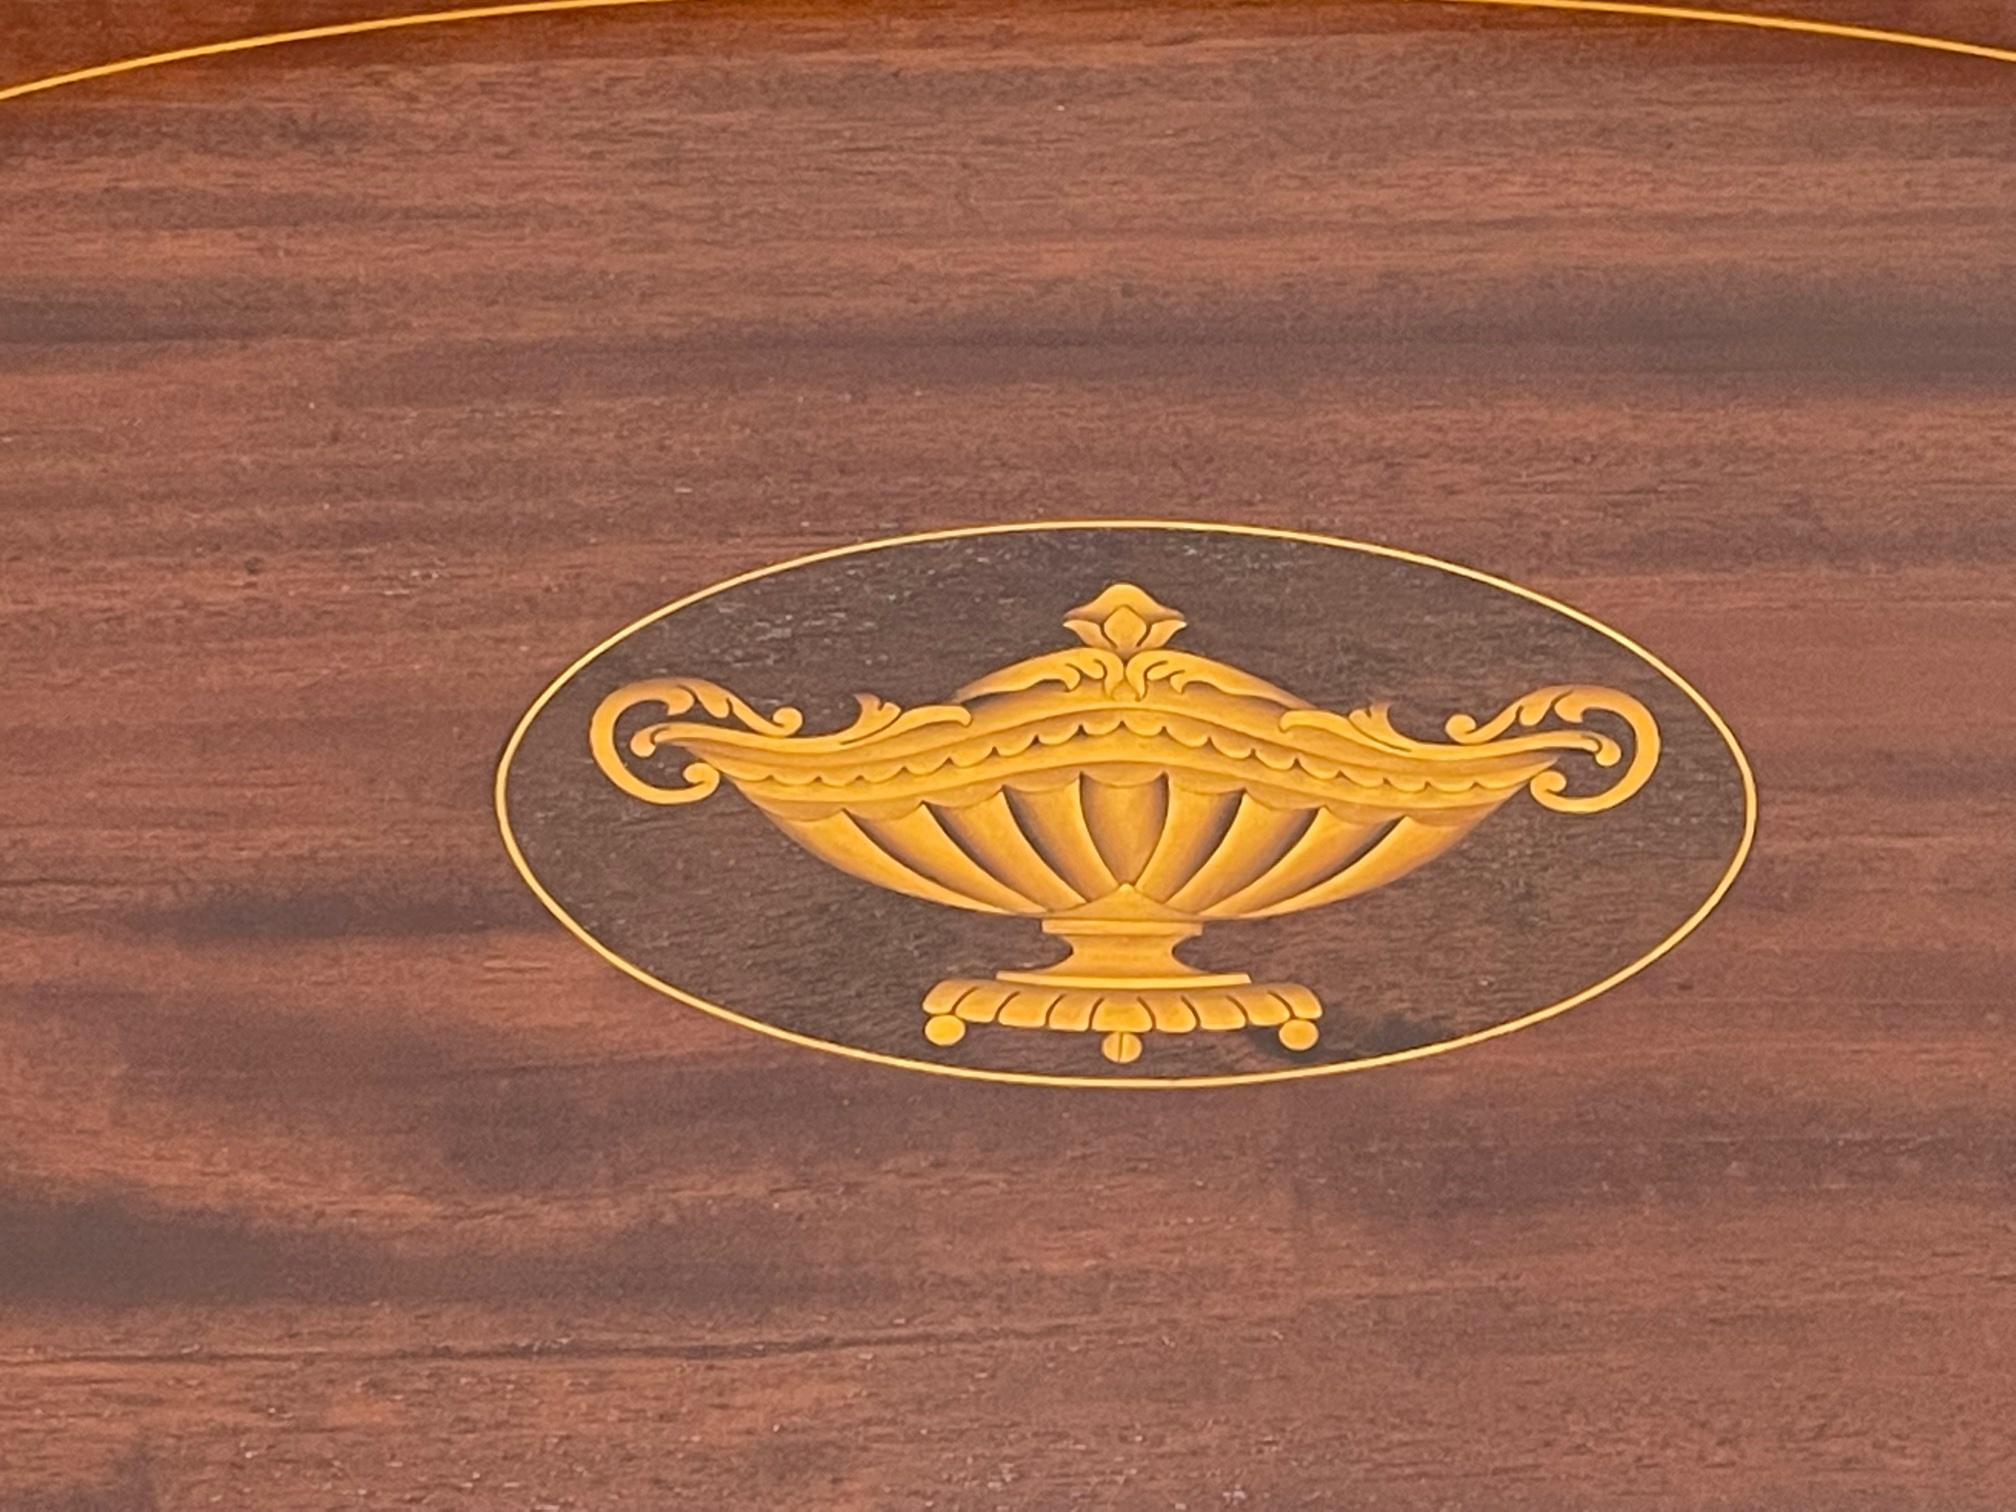 Very handsome sterling silver mounted mahogany gallery tray with neoclassical satinwood inlaid urn decoration. Signed as shown in photo.
Measures: 2